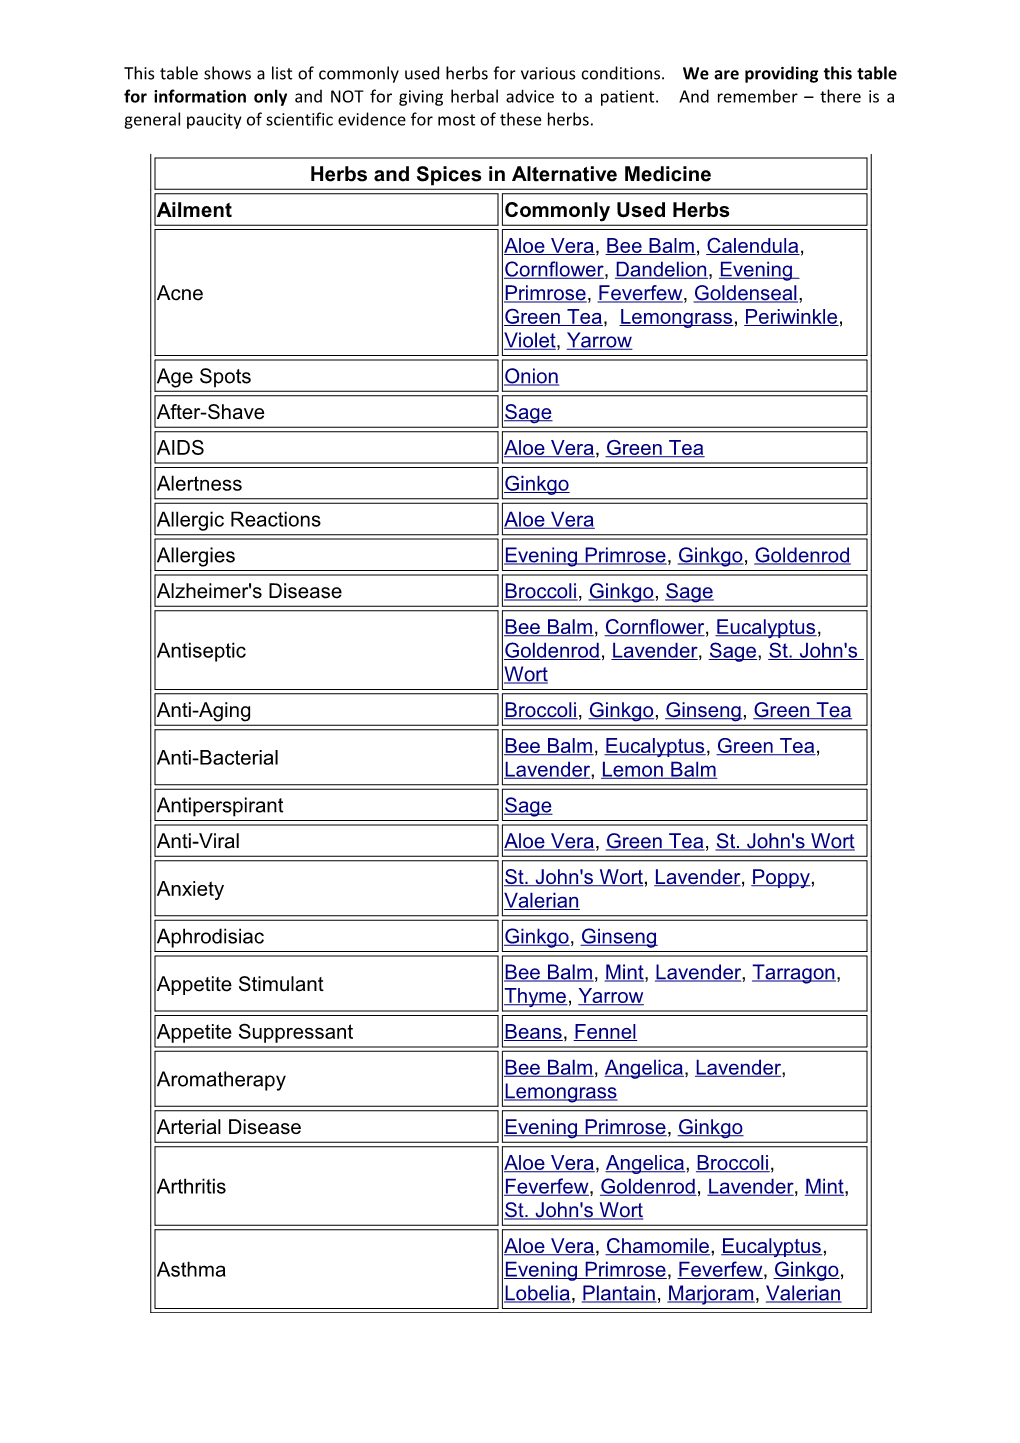 This Table Shows a List of Commonly Used Herbs for Various Conditions. We Are Providing